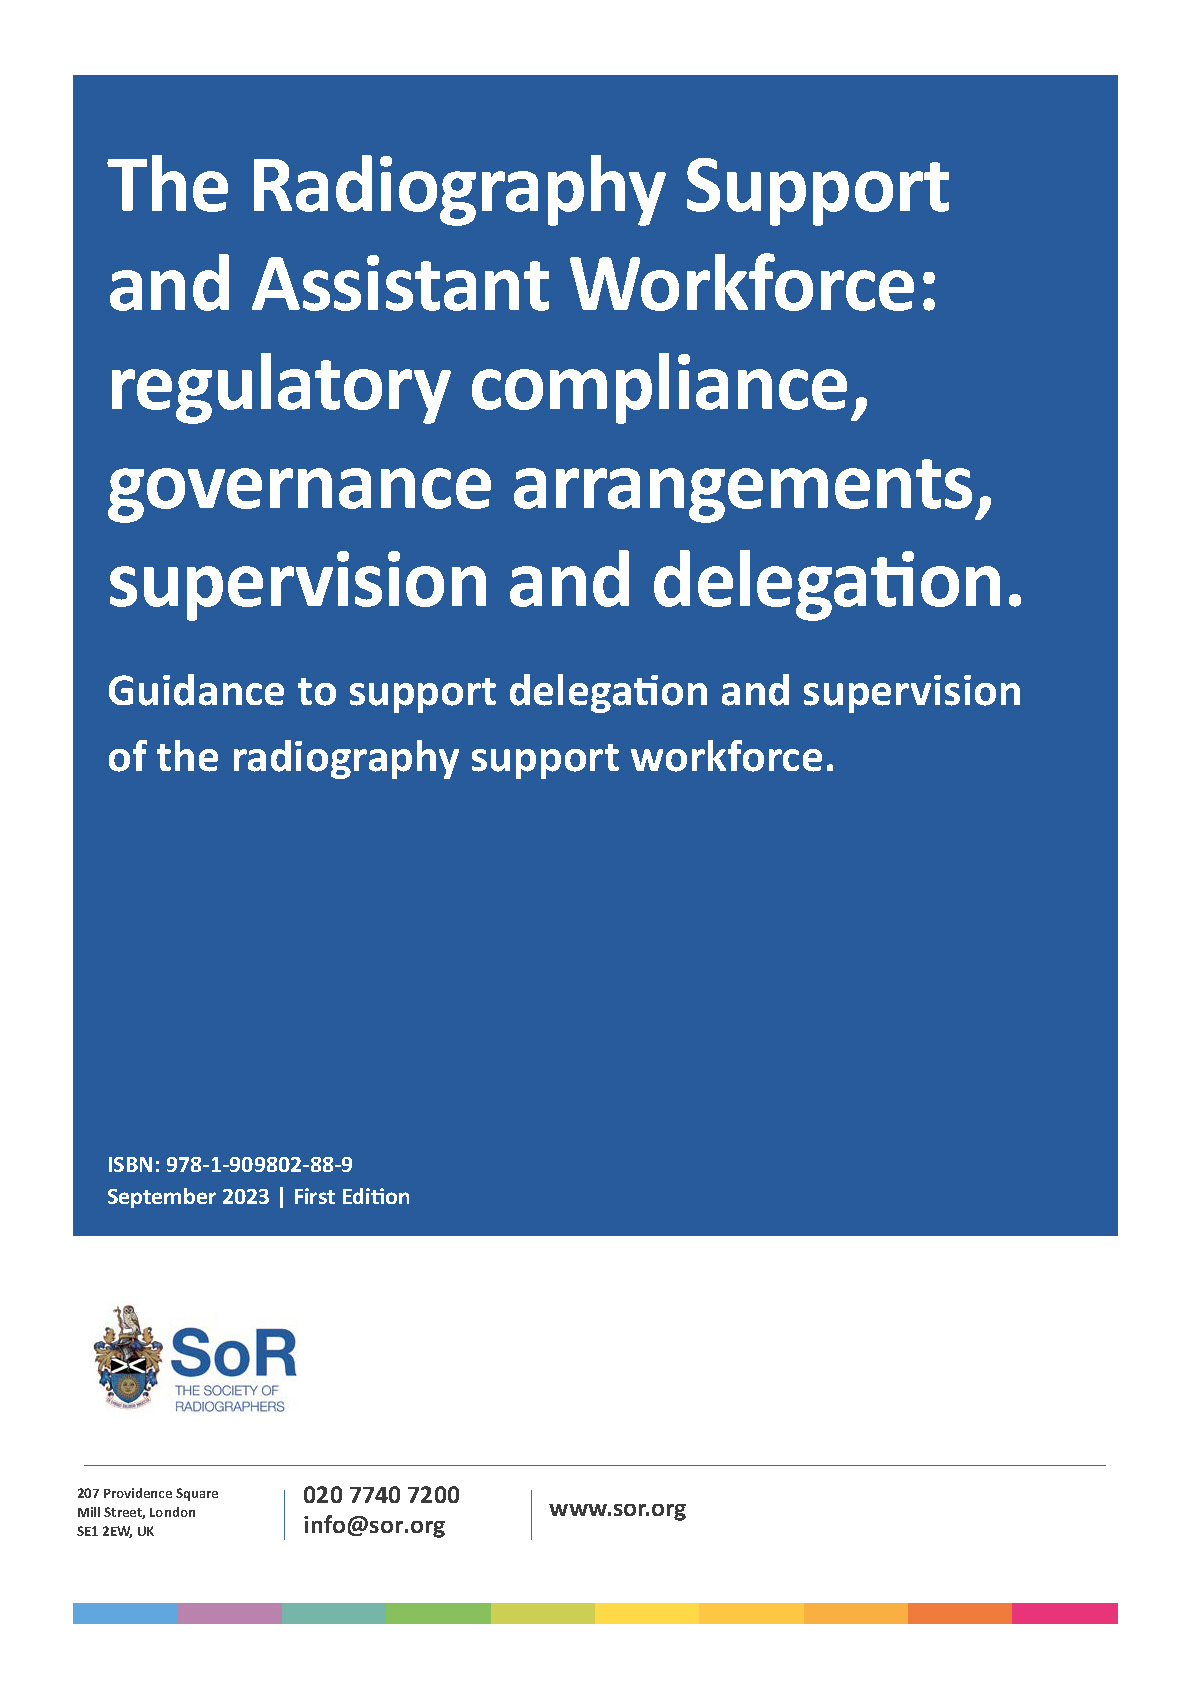 The Radiography Support and Assistant Workforce: regulatory compliance,  governance arrangements, supervision and delegation.